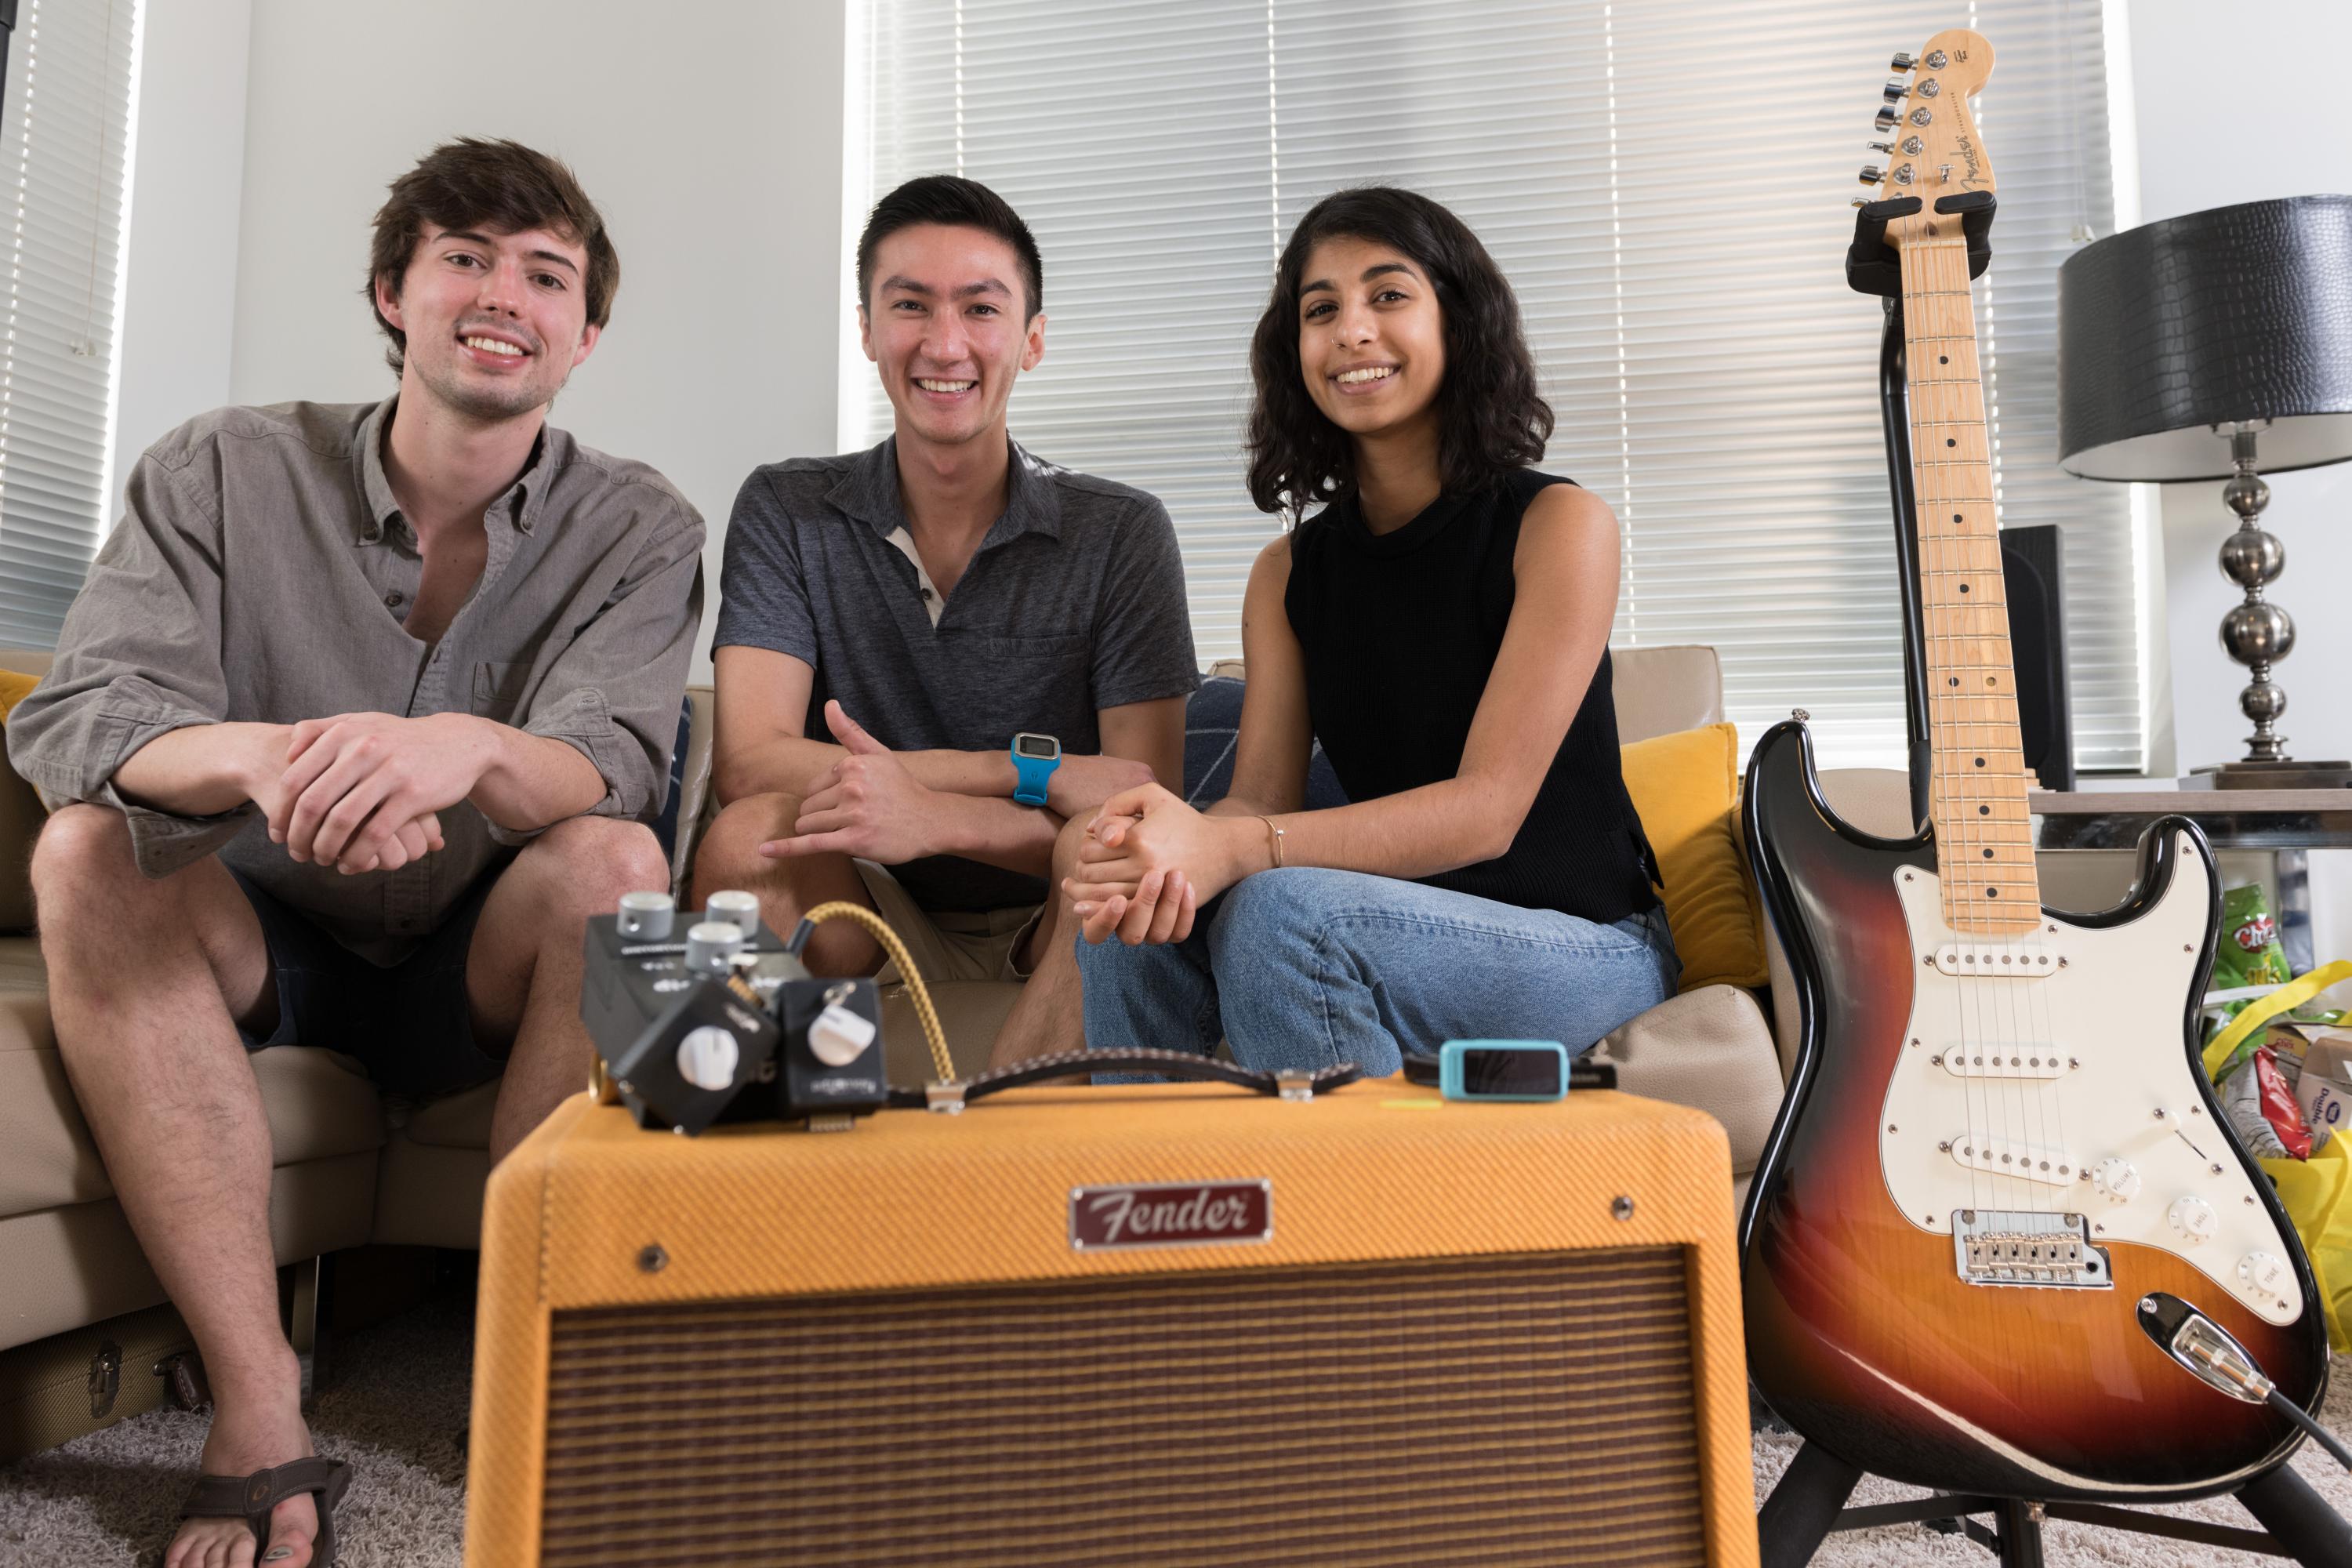 InVenture Prize finalist PedalCreator provides guitarists with affordable, customizable sound effects. Inventors are: Dallas Condra, Jeremy Leff and Vanya Padmanabhan. (Photo by Allison Carter)